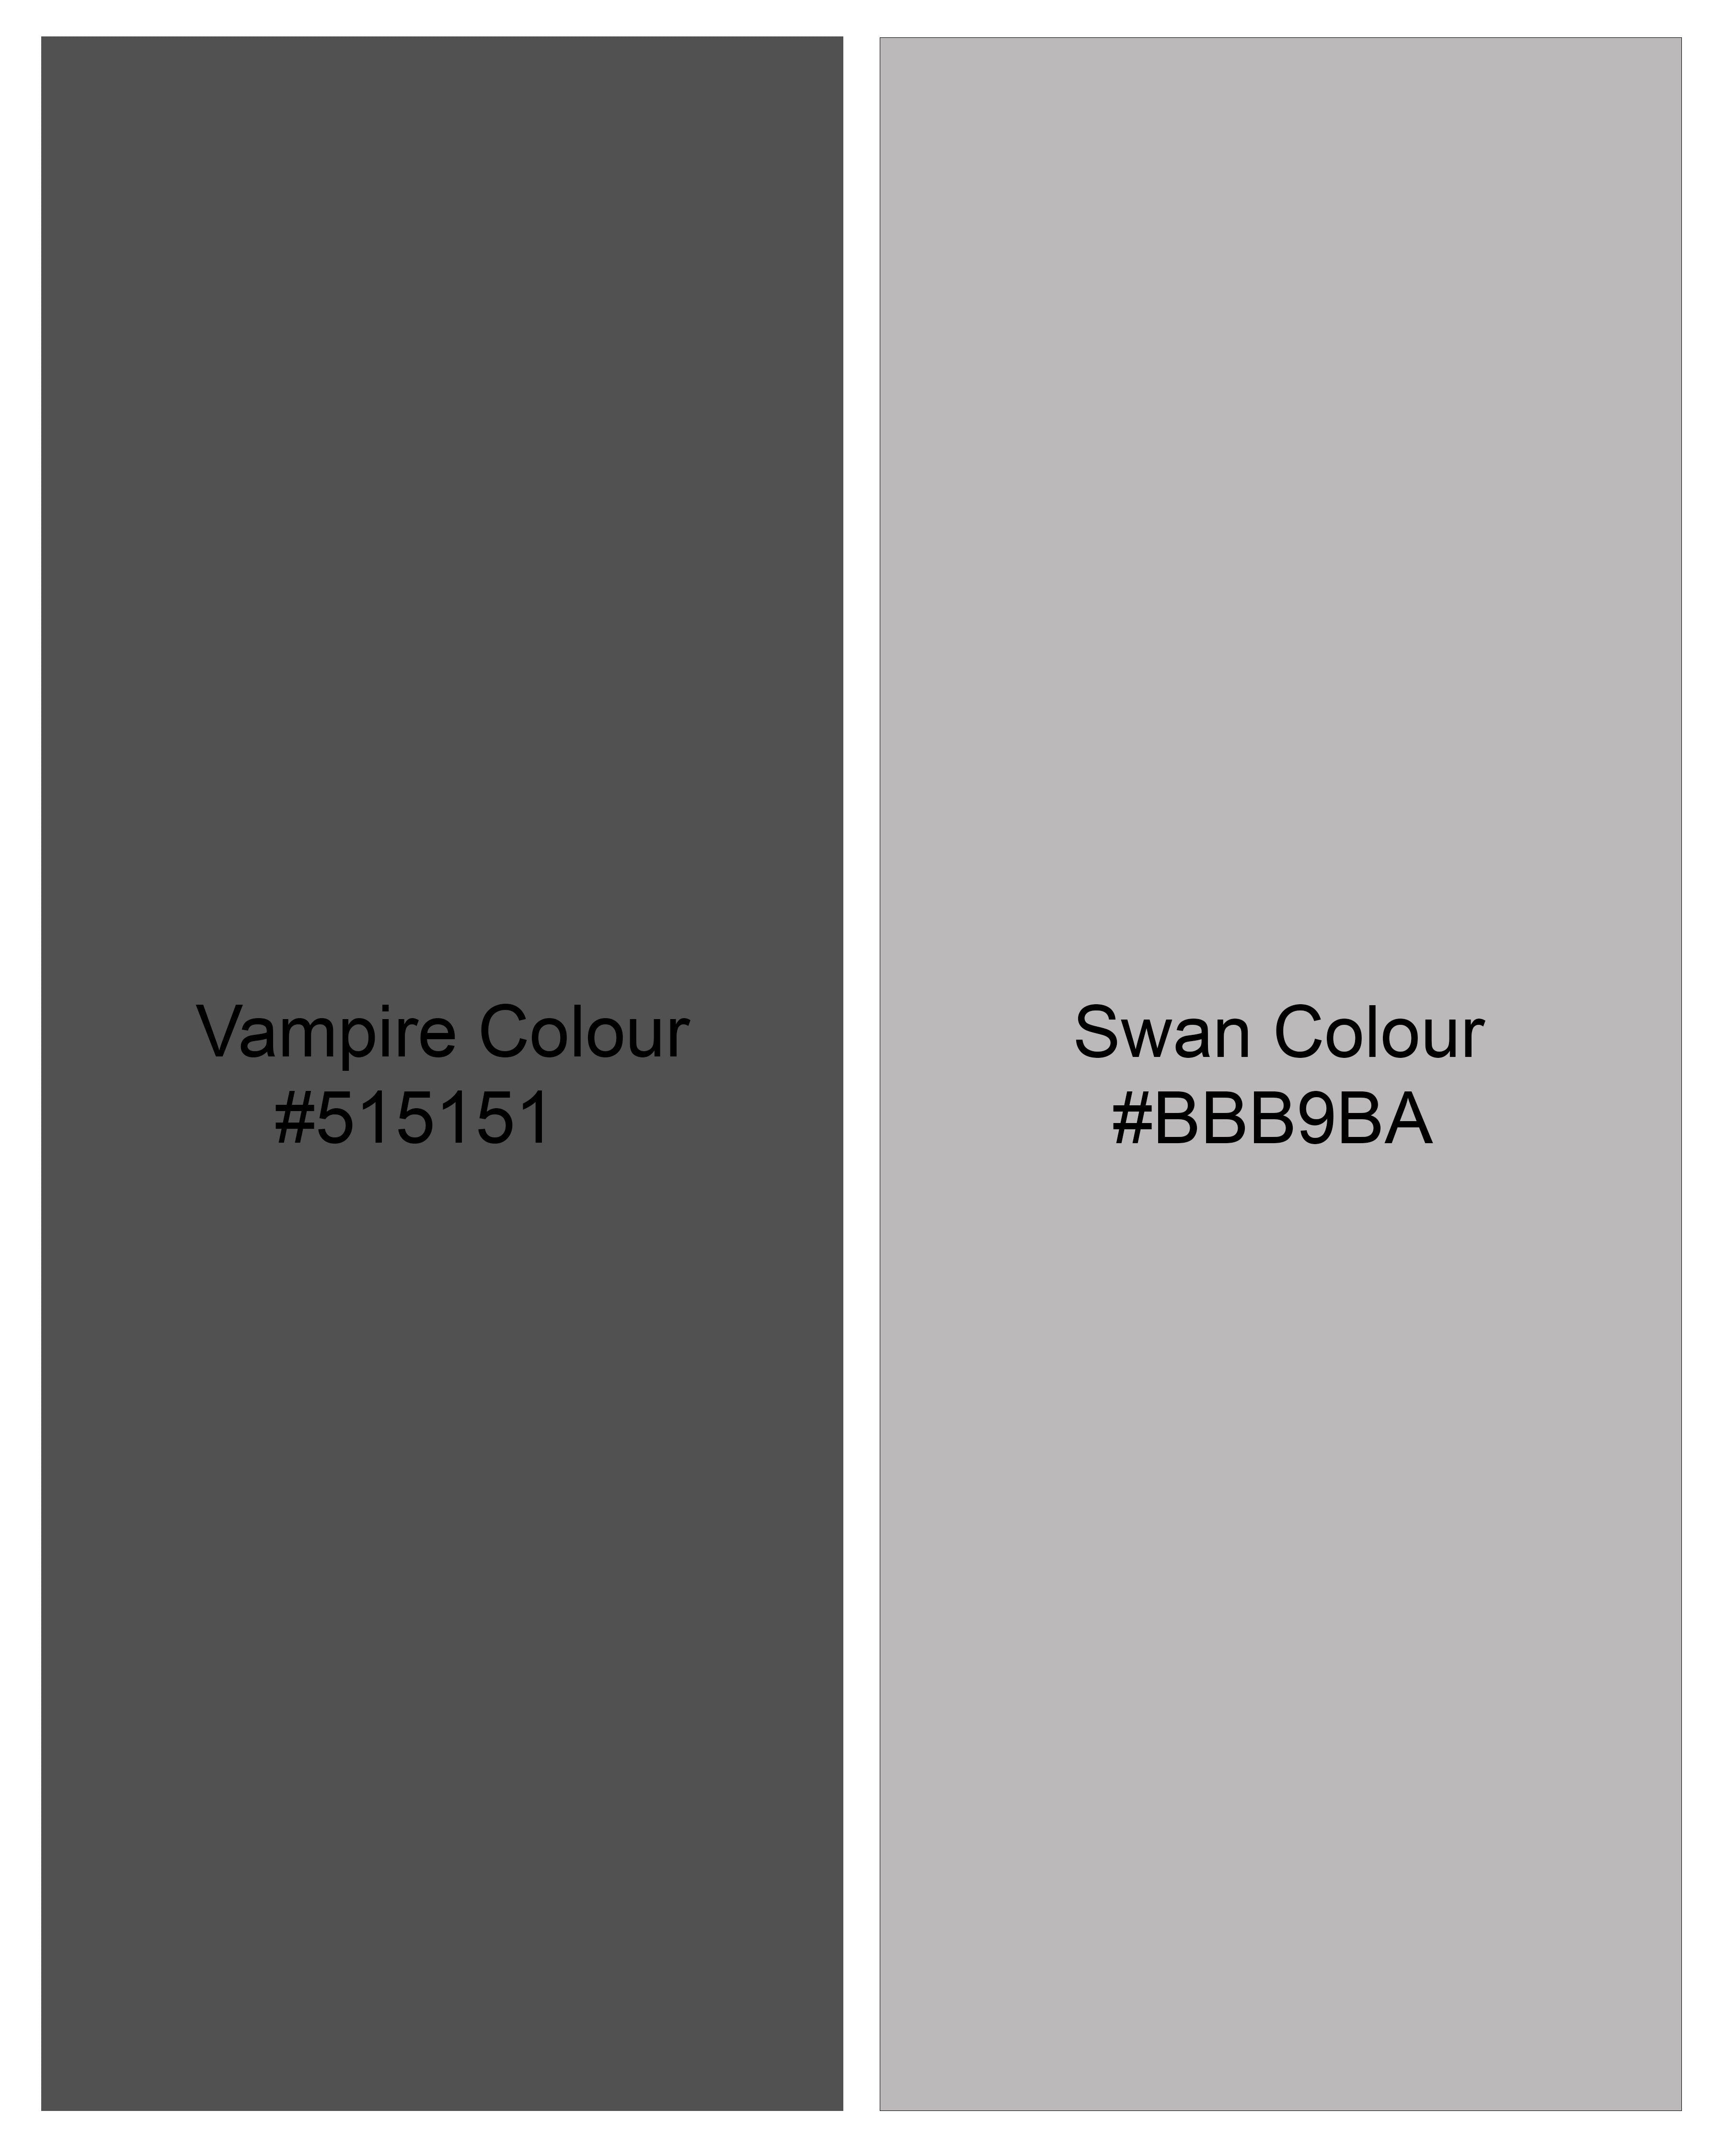 Vampire and Swan Gray Square Printed Super Soft Premium Cotton Shirt 10137-BLK-38, 10137-BLK-H-38, 10137-BLK-39, 10137-BLK-H-39, 10137-BLK-40, 10137-BLK-H-40, 10137-BLK-42, 10137-BLK-H-42, 10137-BLK-44, 10137-BLK-H-44, 10137-BLK-46, 10137-BLK-H-46, 10137-BLK-48, 10137-BLK-H-48, 10137-BLK-50, 10137-BLK-H-50, 10137-BLK-52, 10137-BLK-H-52